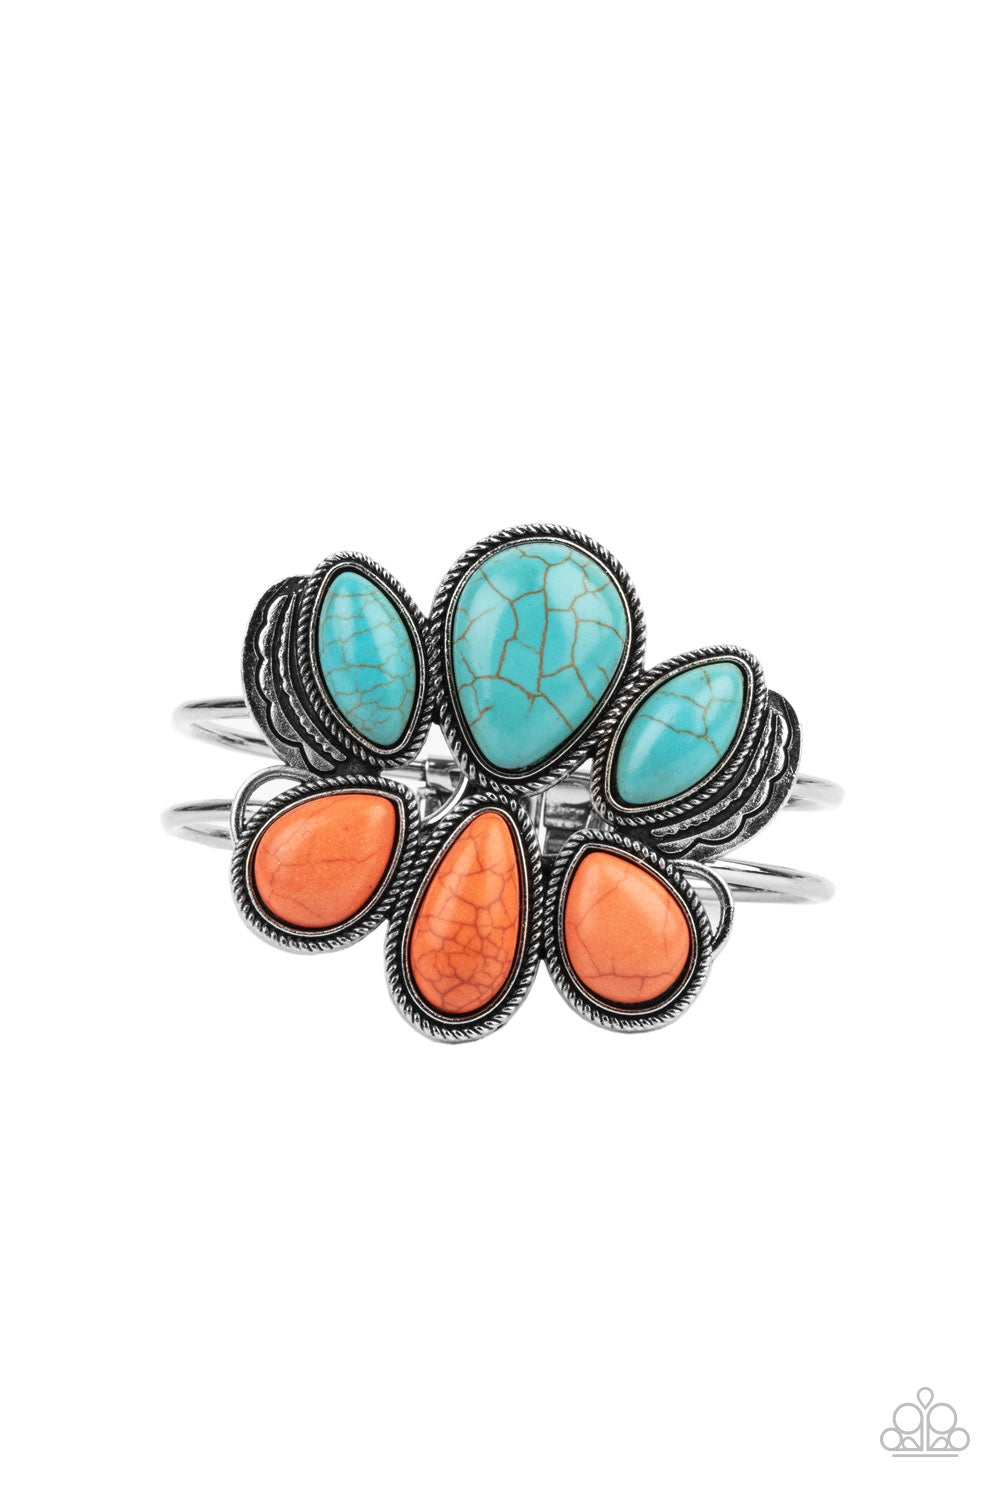 Botanical Badlands - Orange Hinged Bracelets encased in antiqued silver rope-like frames, a colorful collection of turquoise and orange stone teardrops stack into a rustic centerpiece atop a layered silver cuff. Features an adjustable hinged closure.  Sold as one individual bracelet.  Paparazzi Jewelry is lead and nickel free so it's perfect for sensitive skin too!